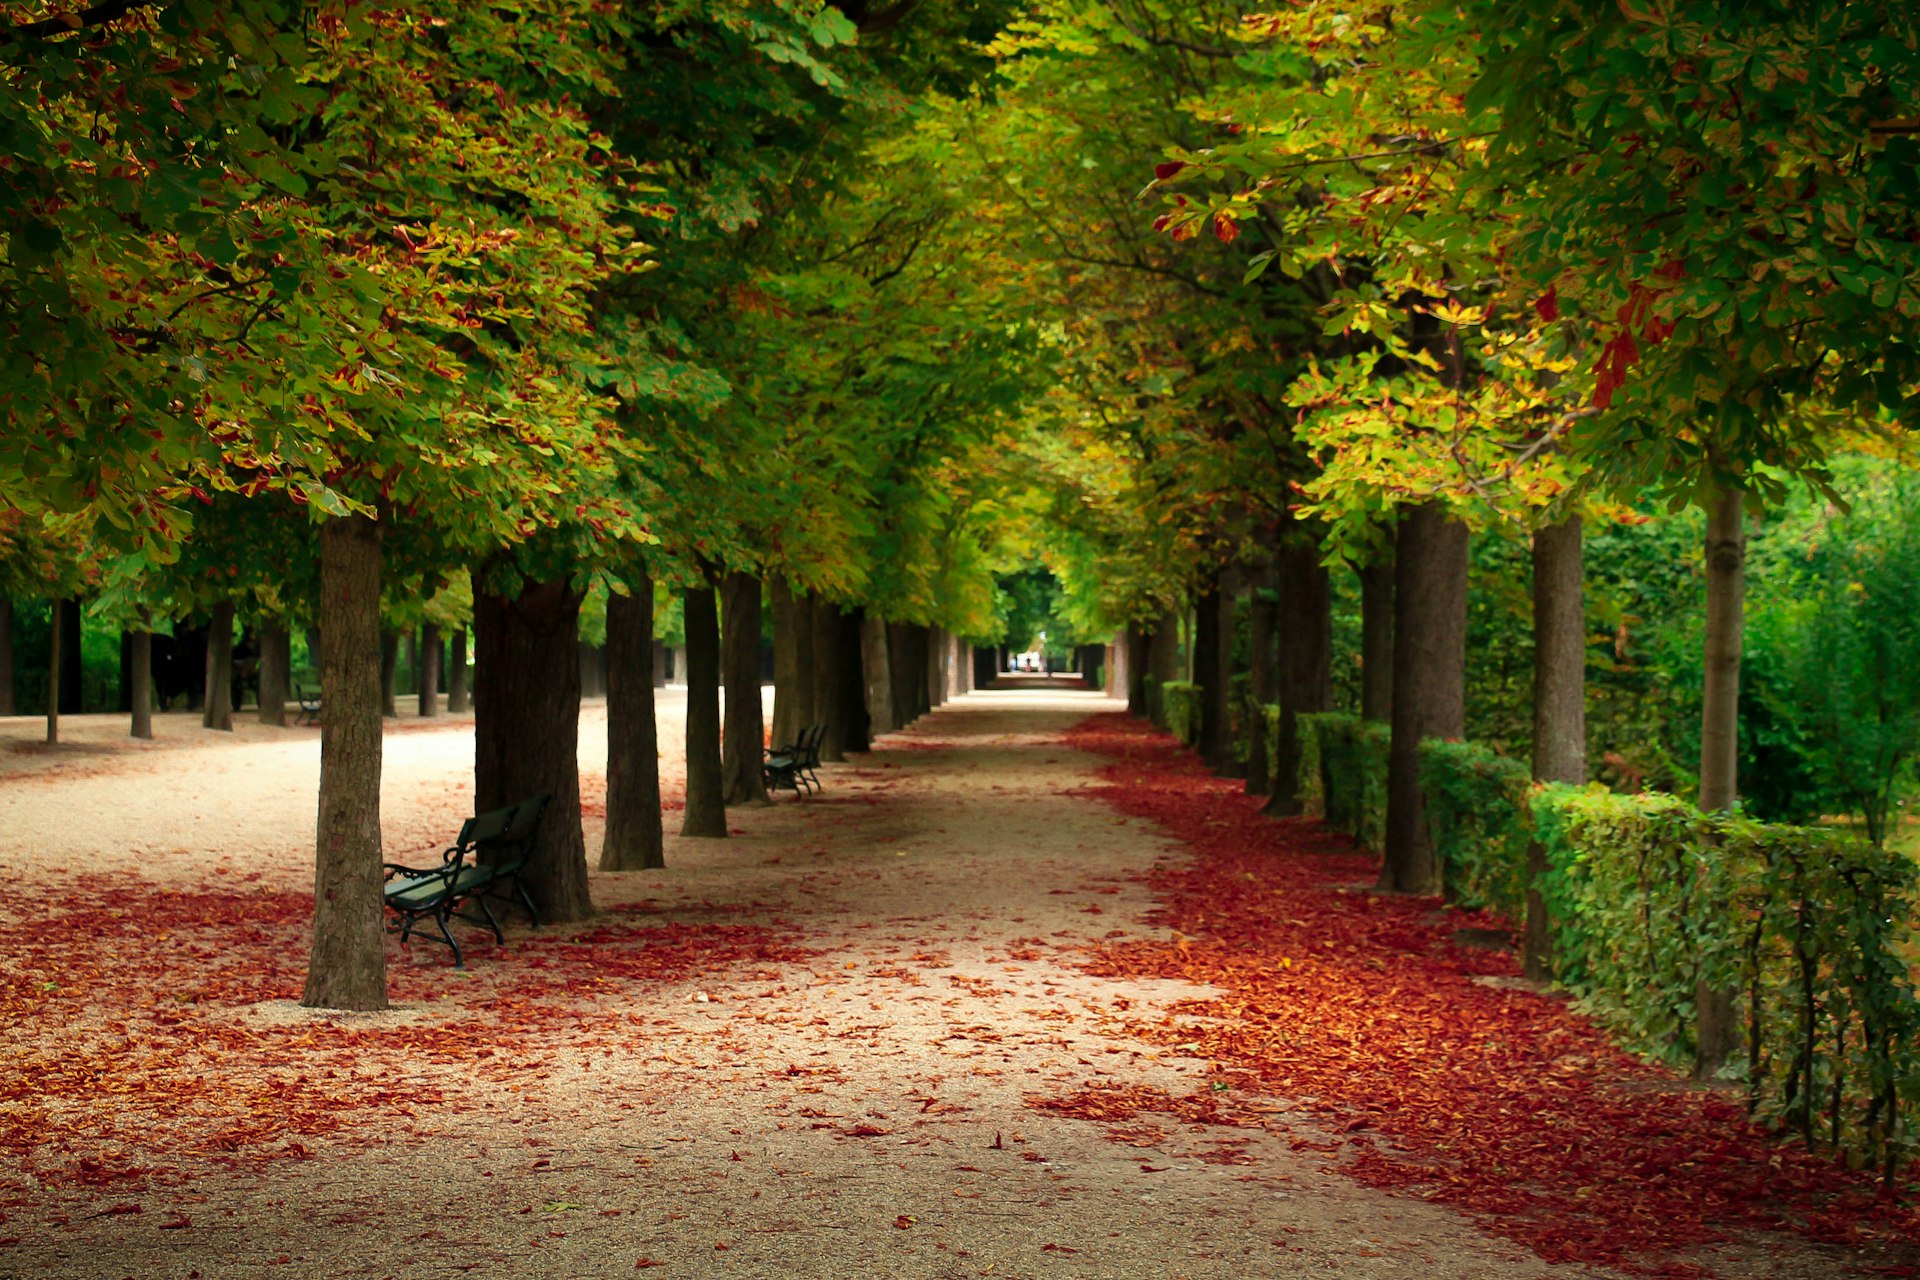 Trees over a leafy sidewalk without people